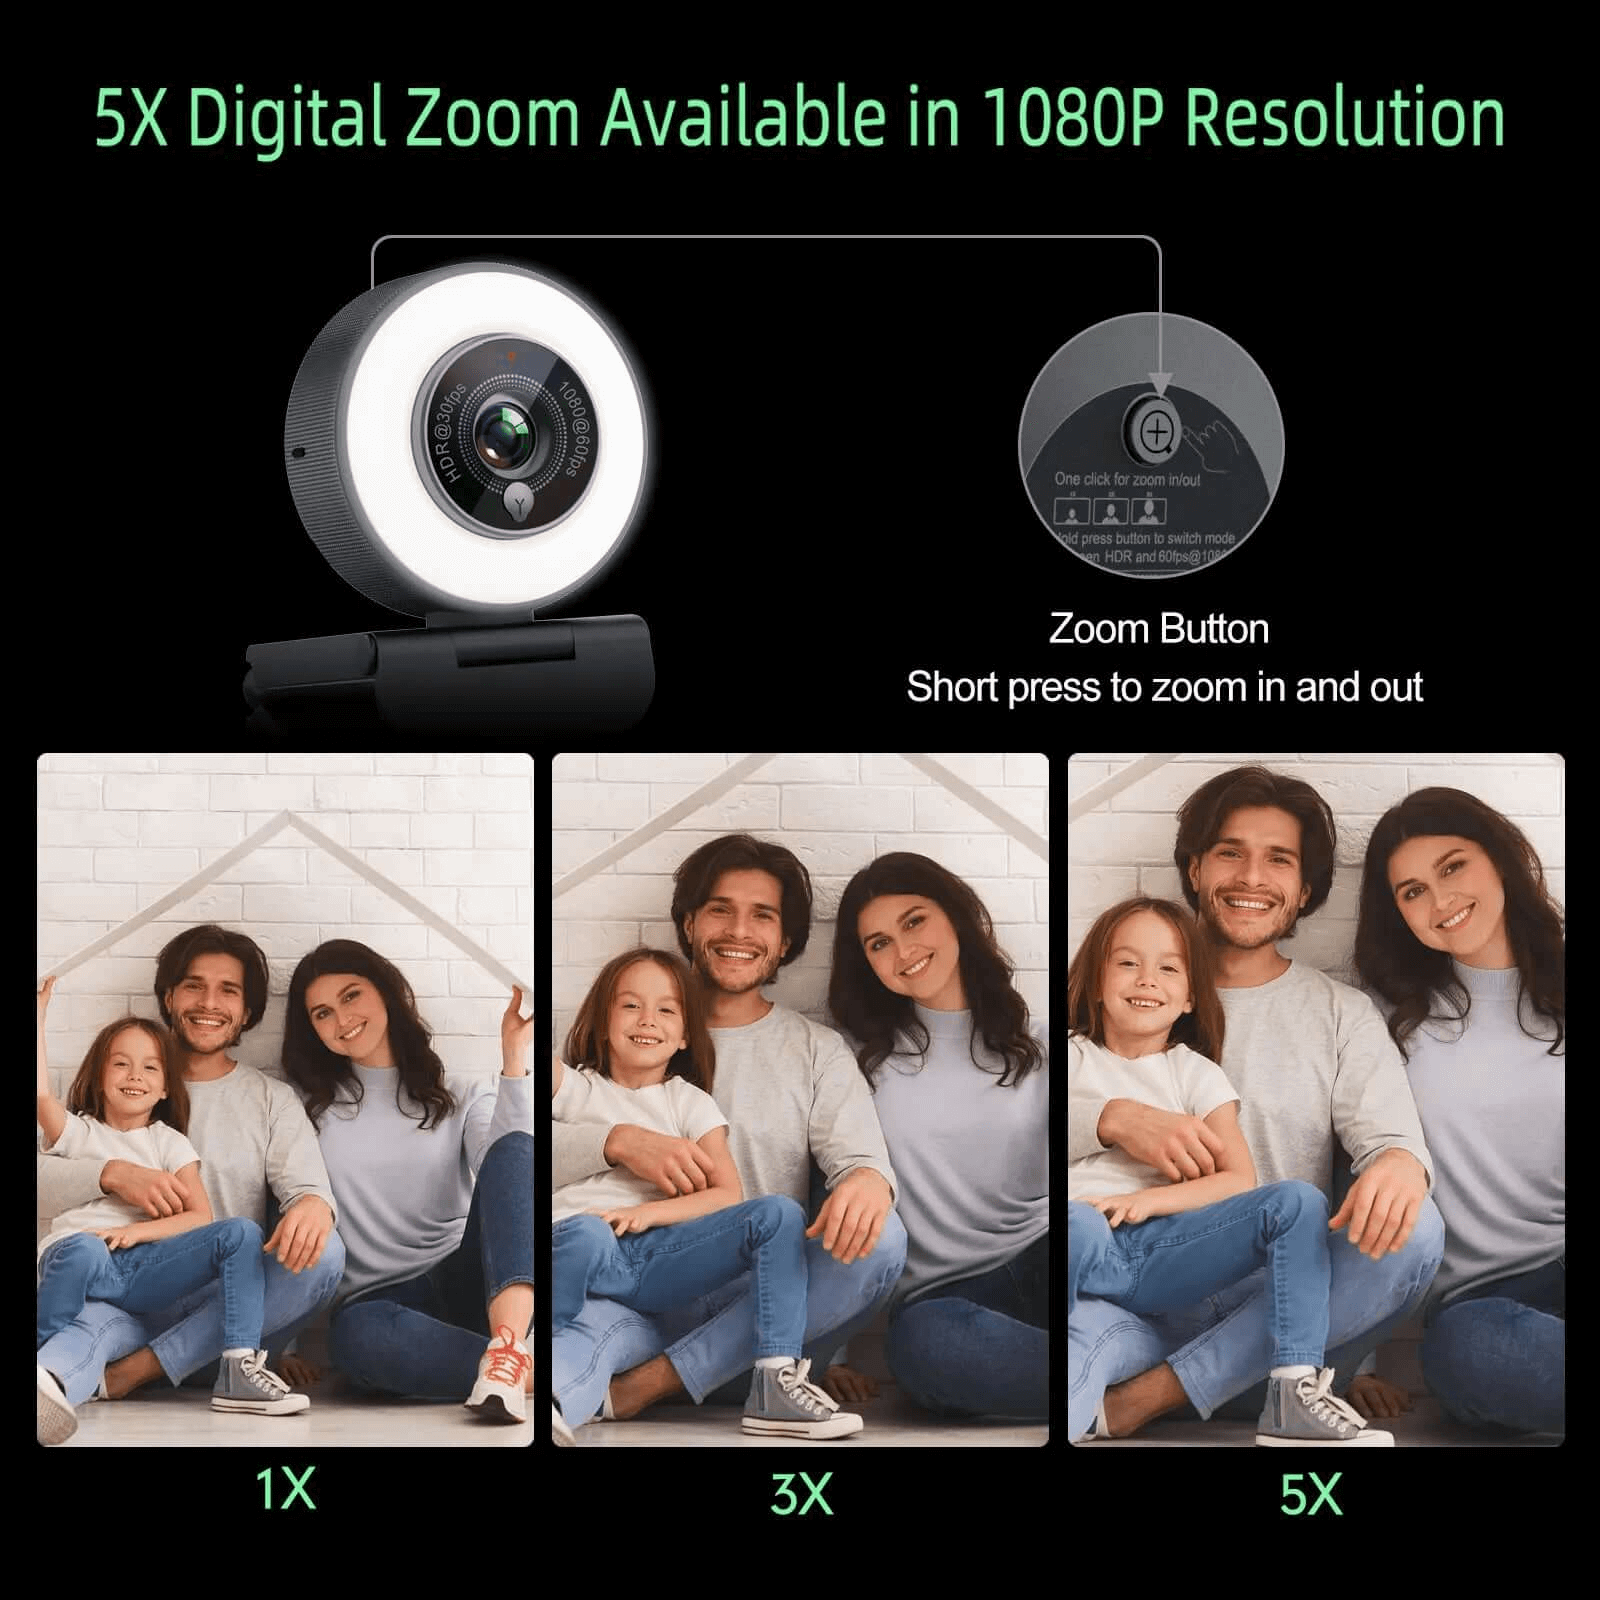 5X Digital Zoom Available in 1080P Resolution